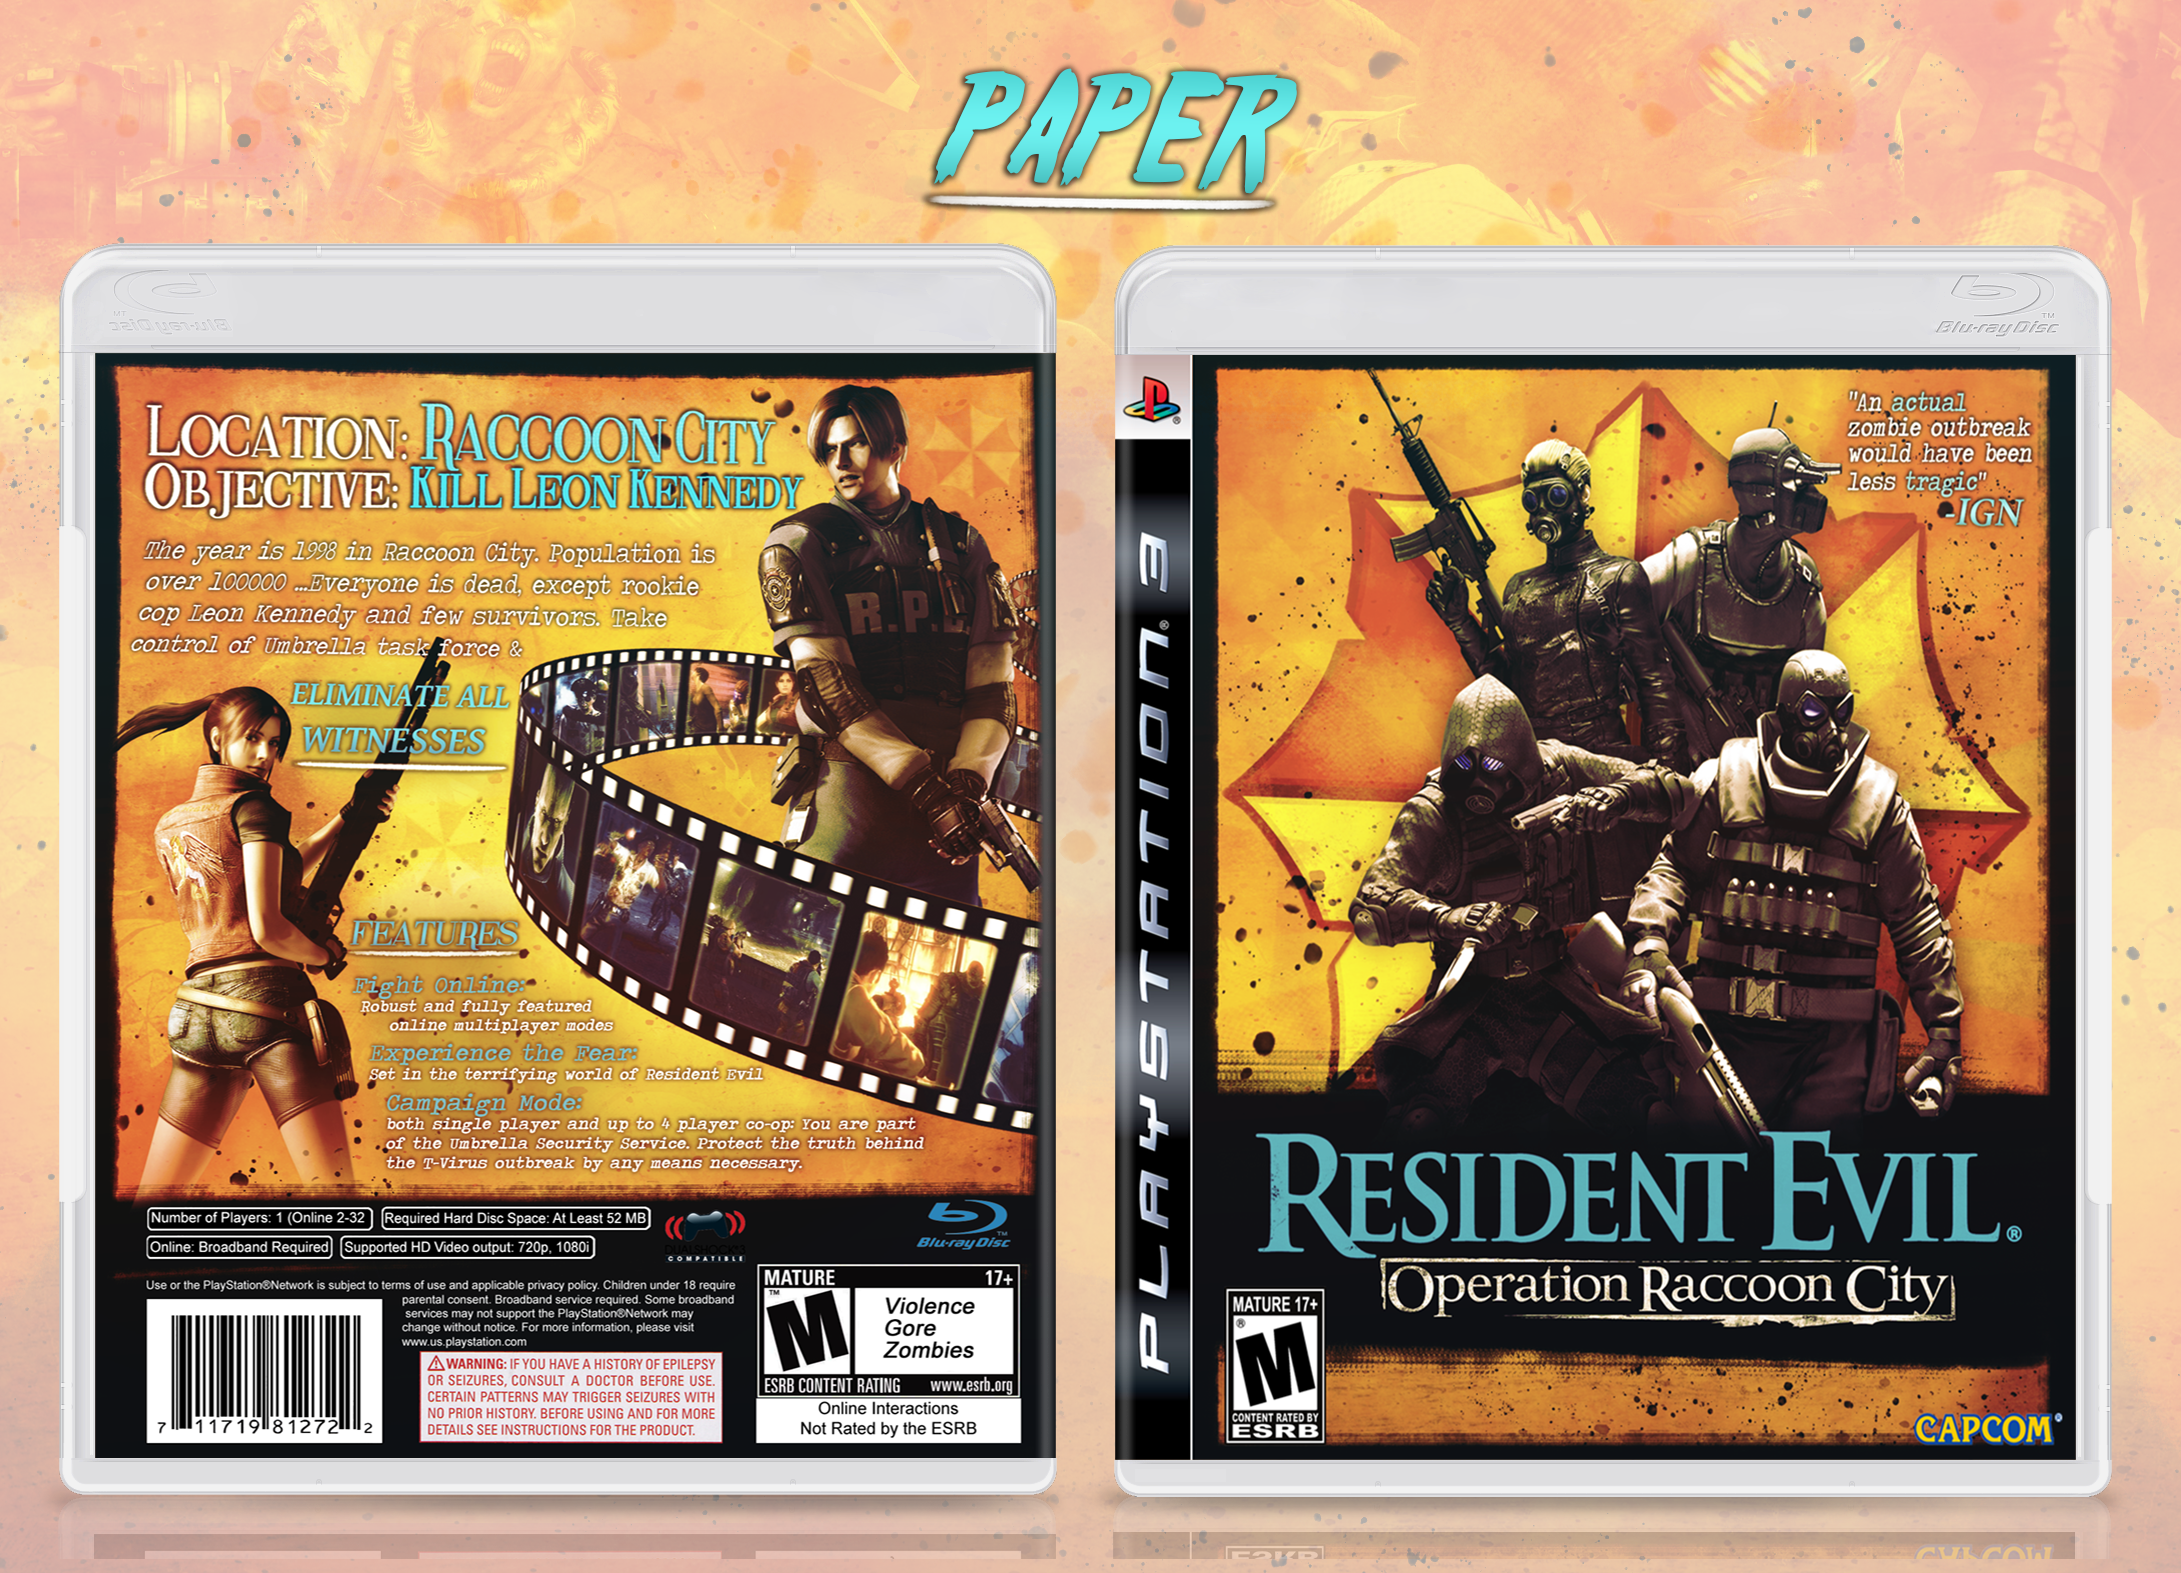 Resident Evil Operation Racoon City box cover